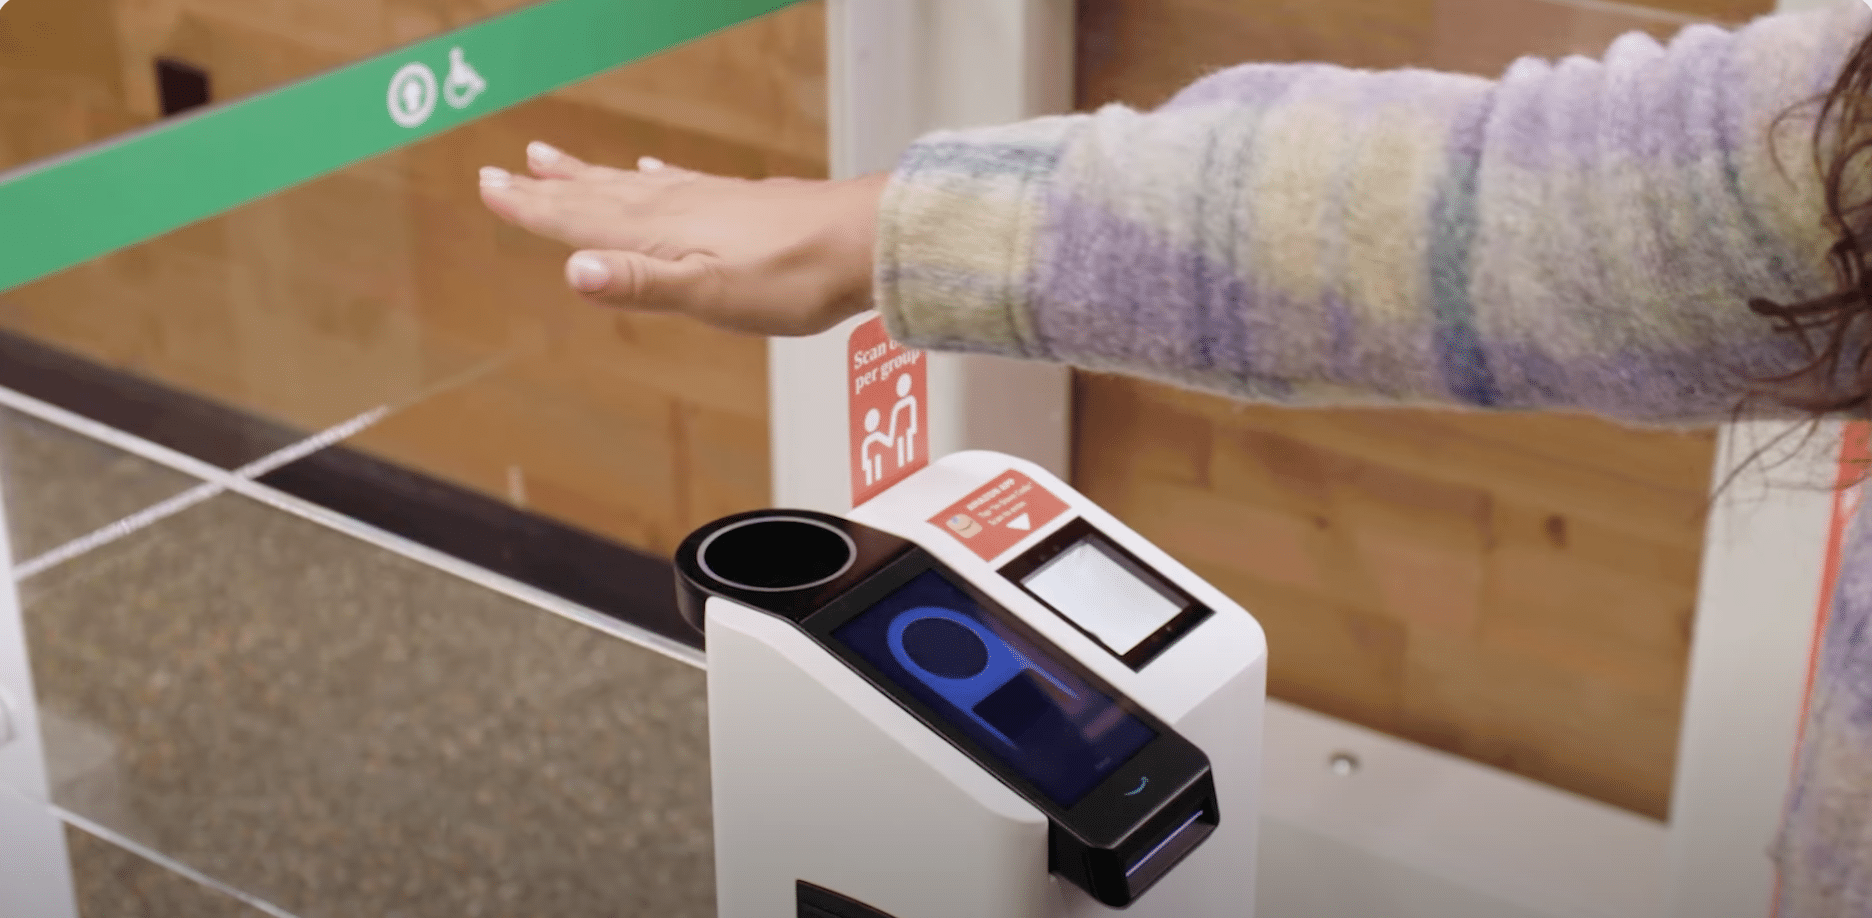 Whole foods to roll out “Palm Scan” payments nationwide